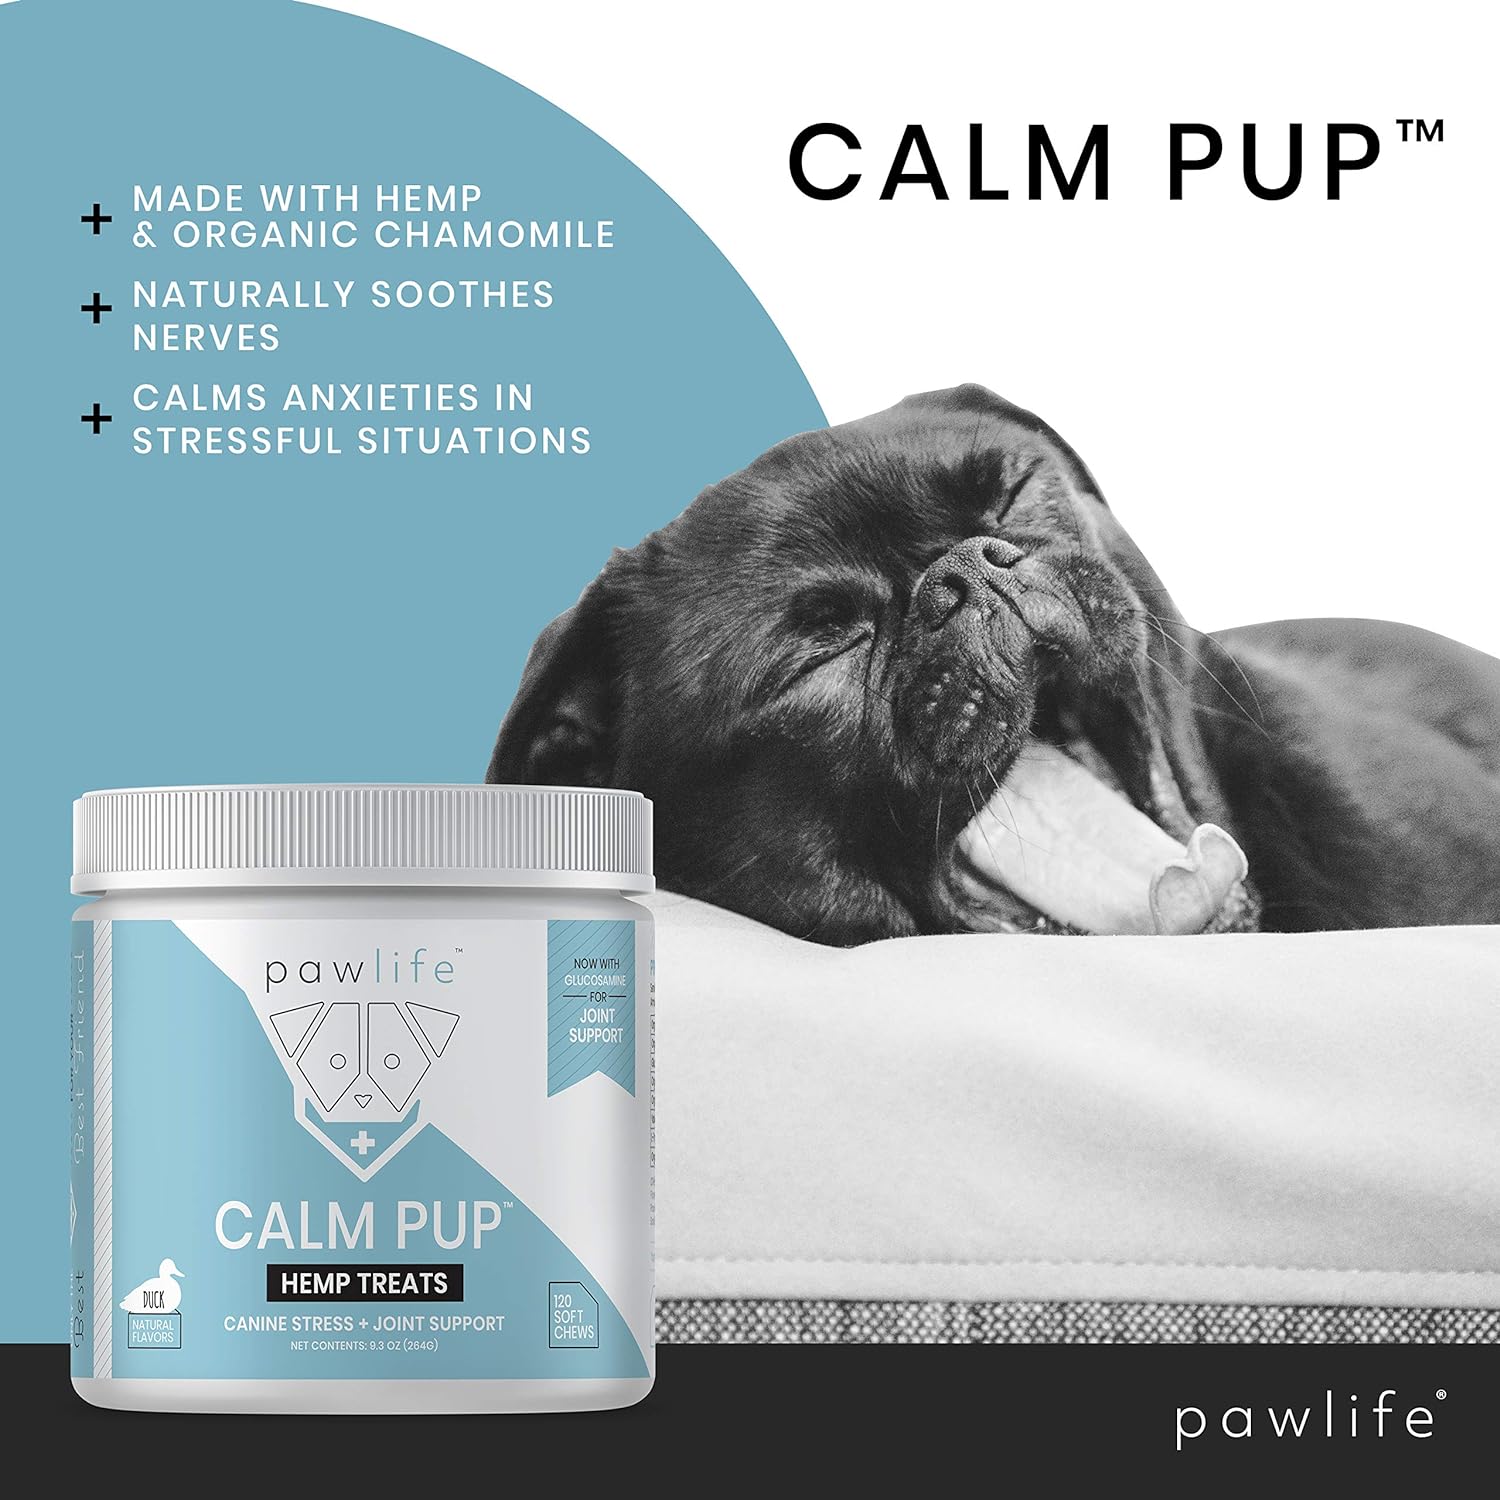 pawlife Calming Chews with Organic Hemp Oil| Dog Anxiety Relief & Travel Friendly| Glucosamine to Help with Join Support| 120 Soft Chews & up to 4-Month Supply : Pet Supplies